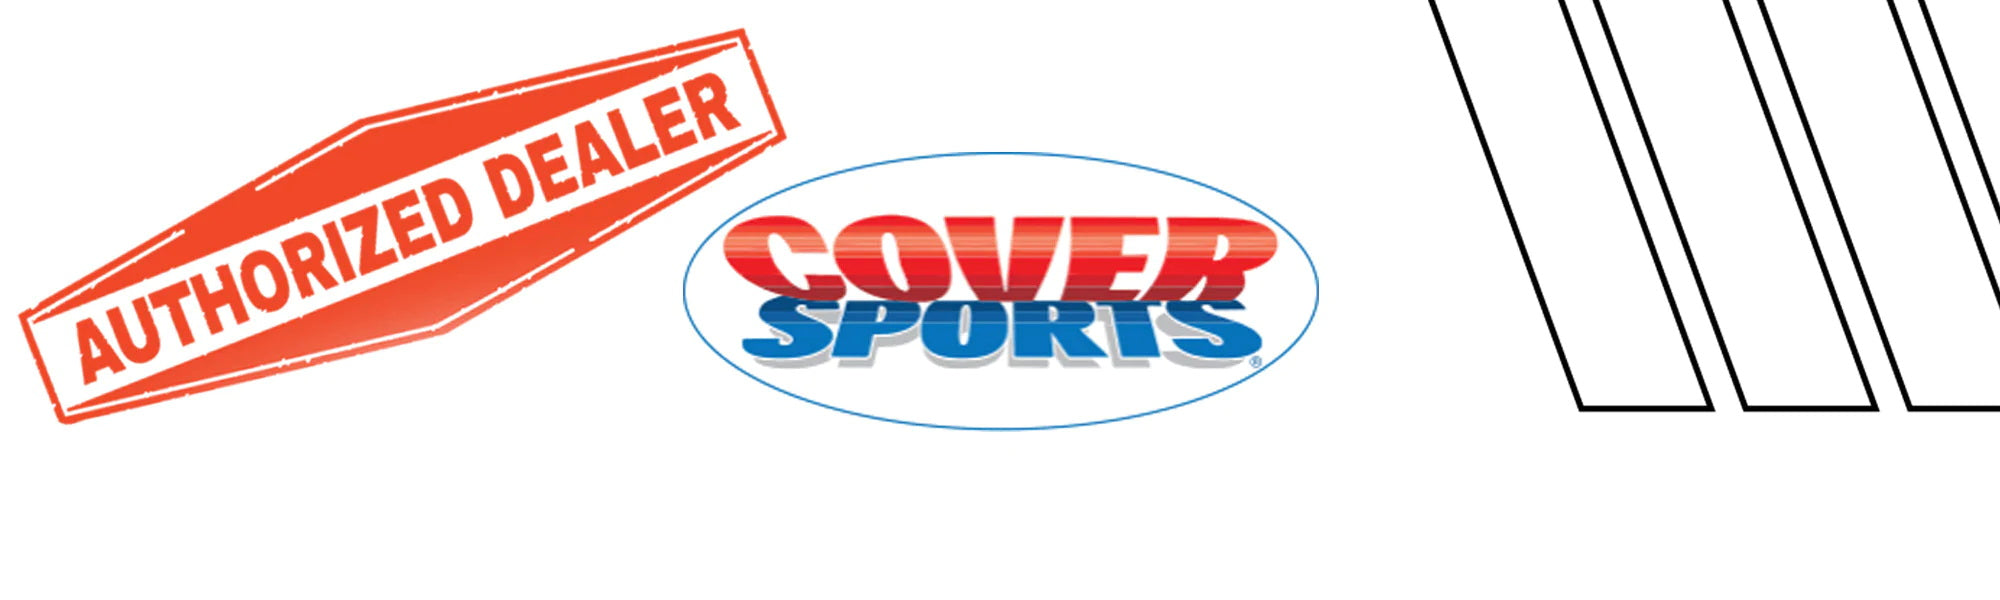 Cover Sports